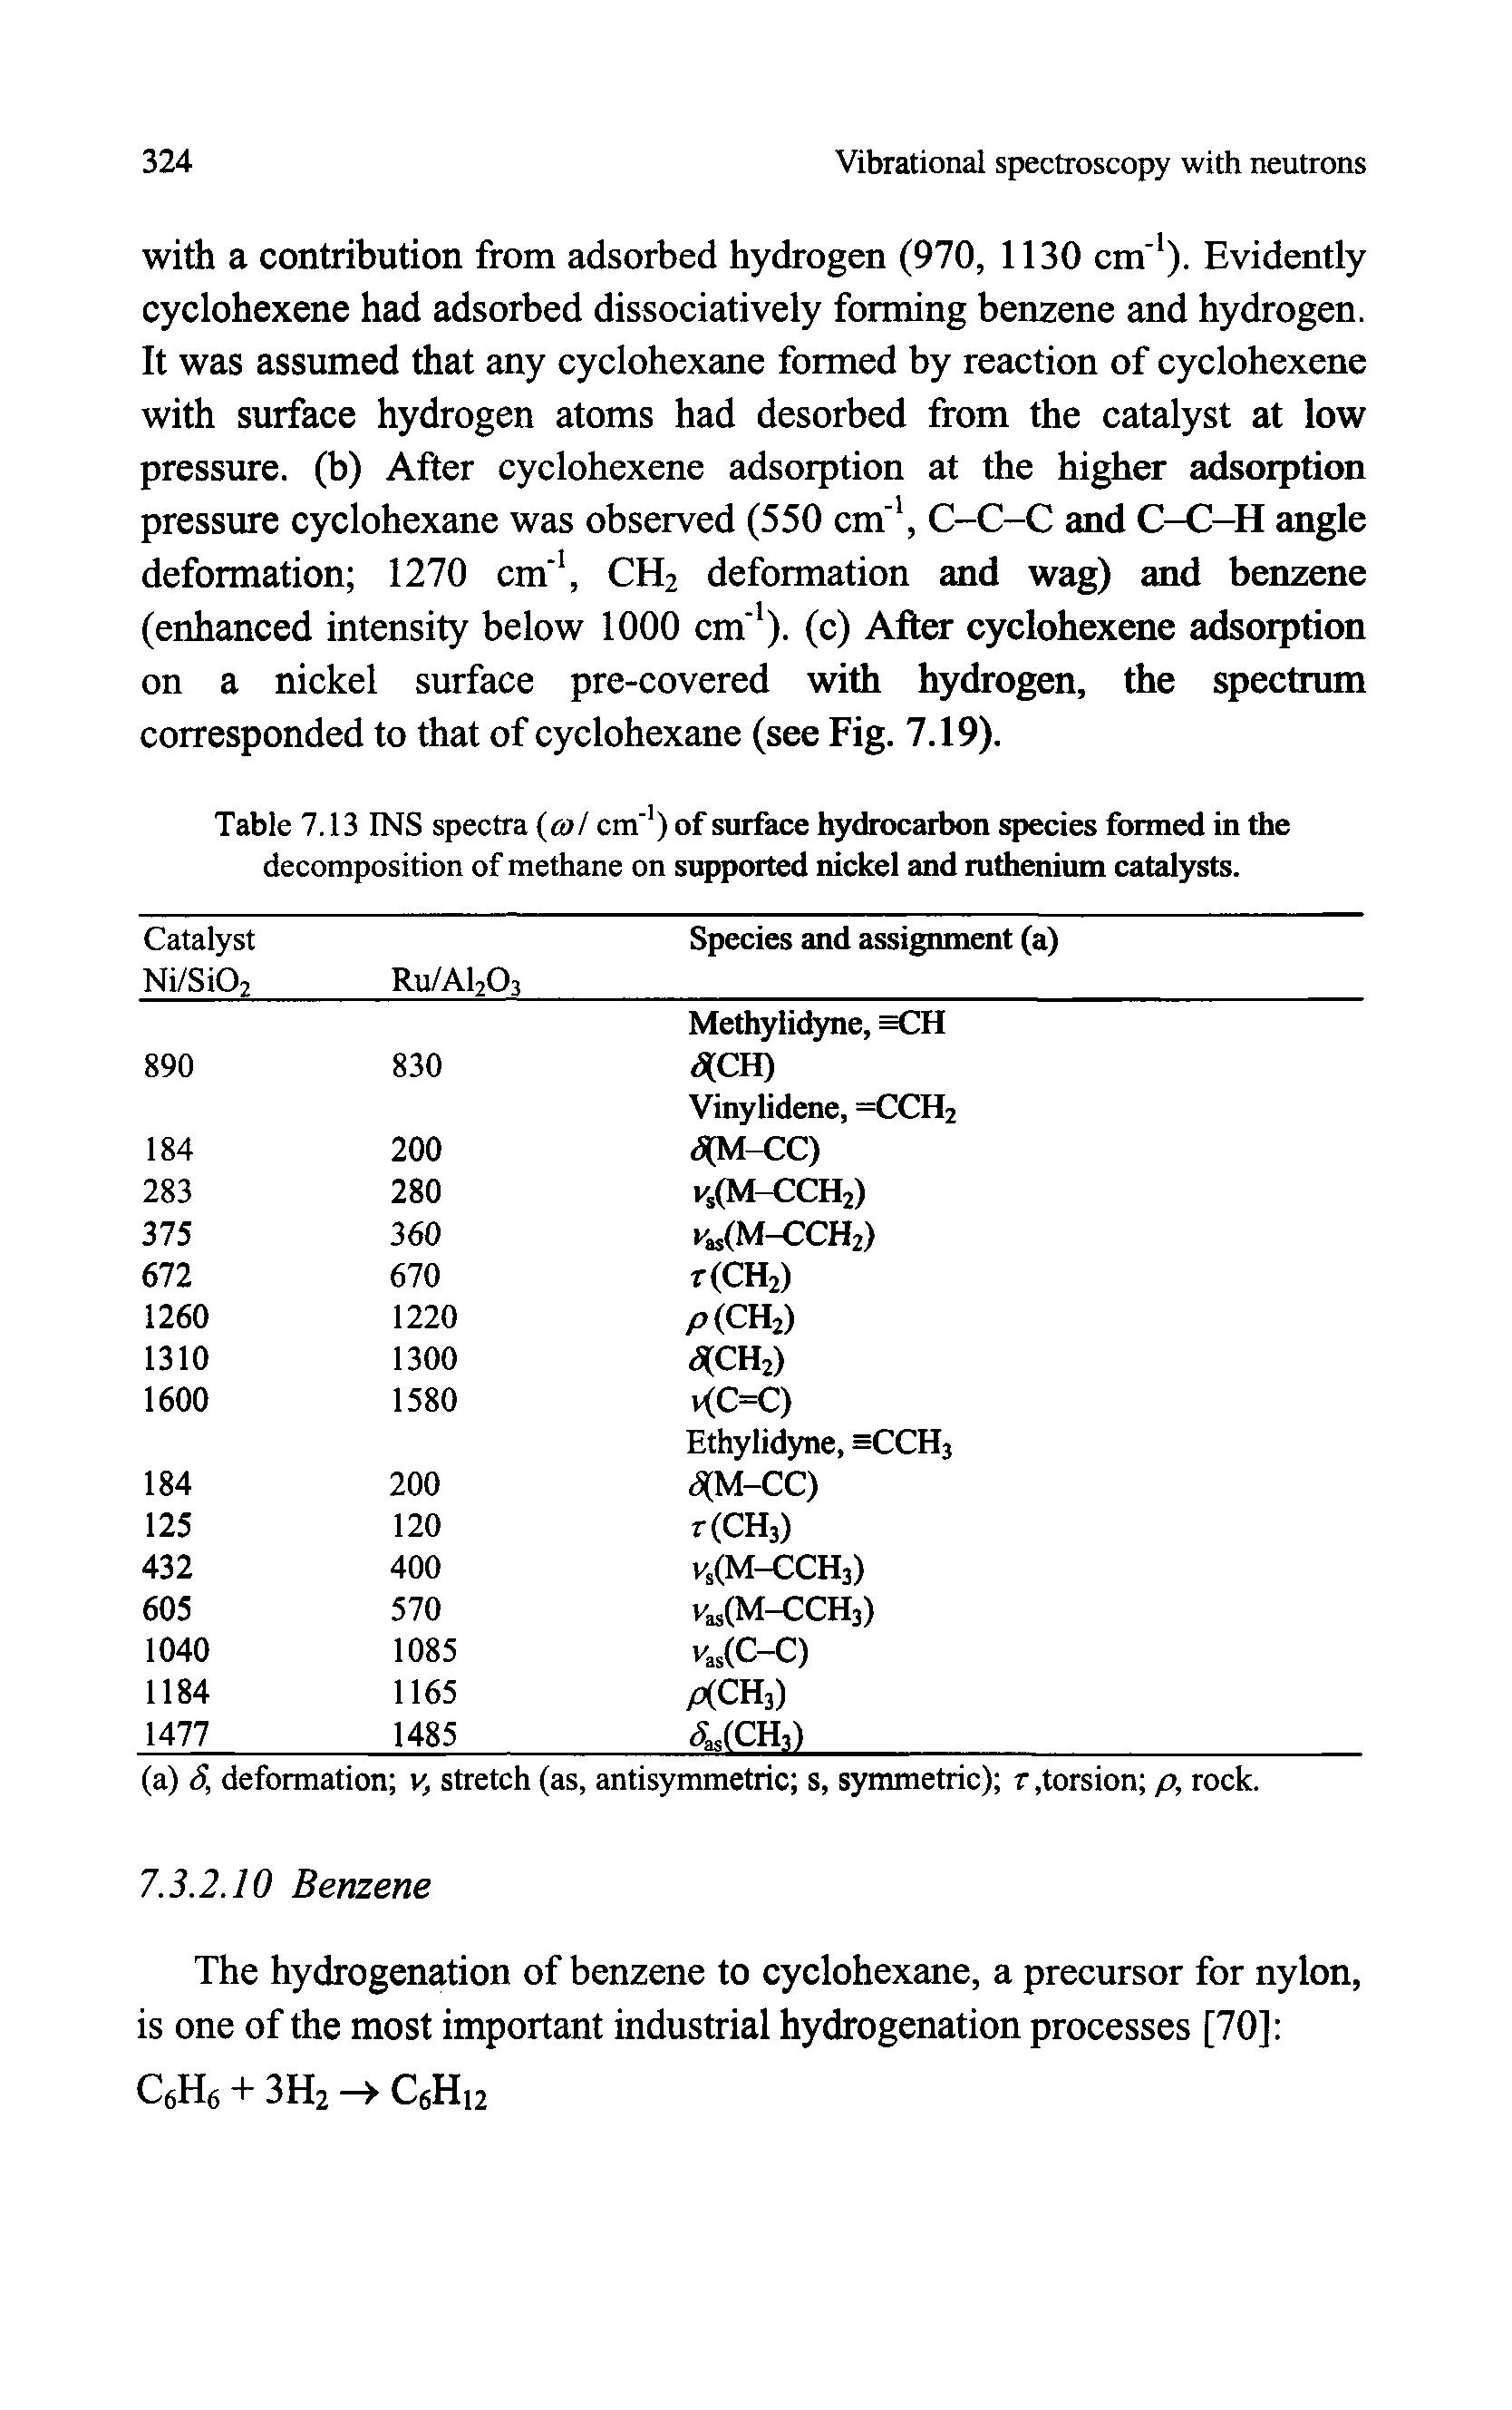 Table 7.13 INS spectra col cm" ) of surface hydrocarbon species formed in the decomposition of methane on supported nickel and ruthenium catalysts.